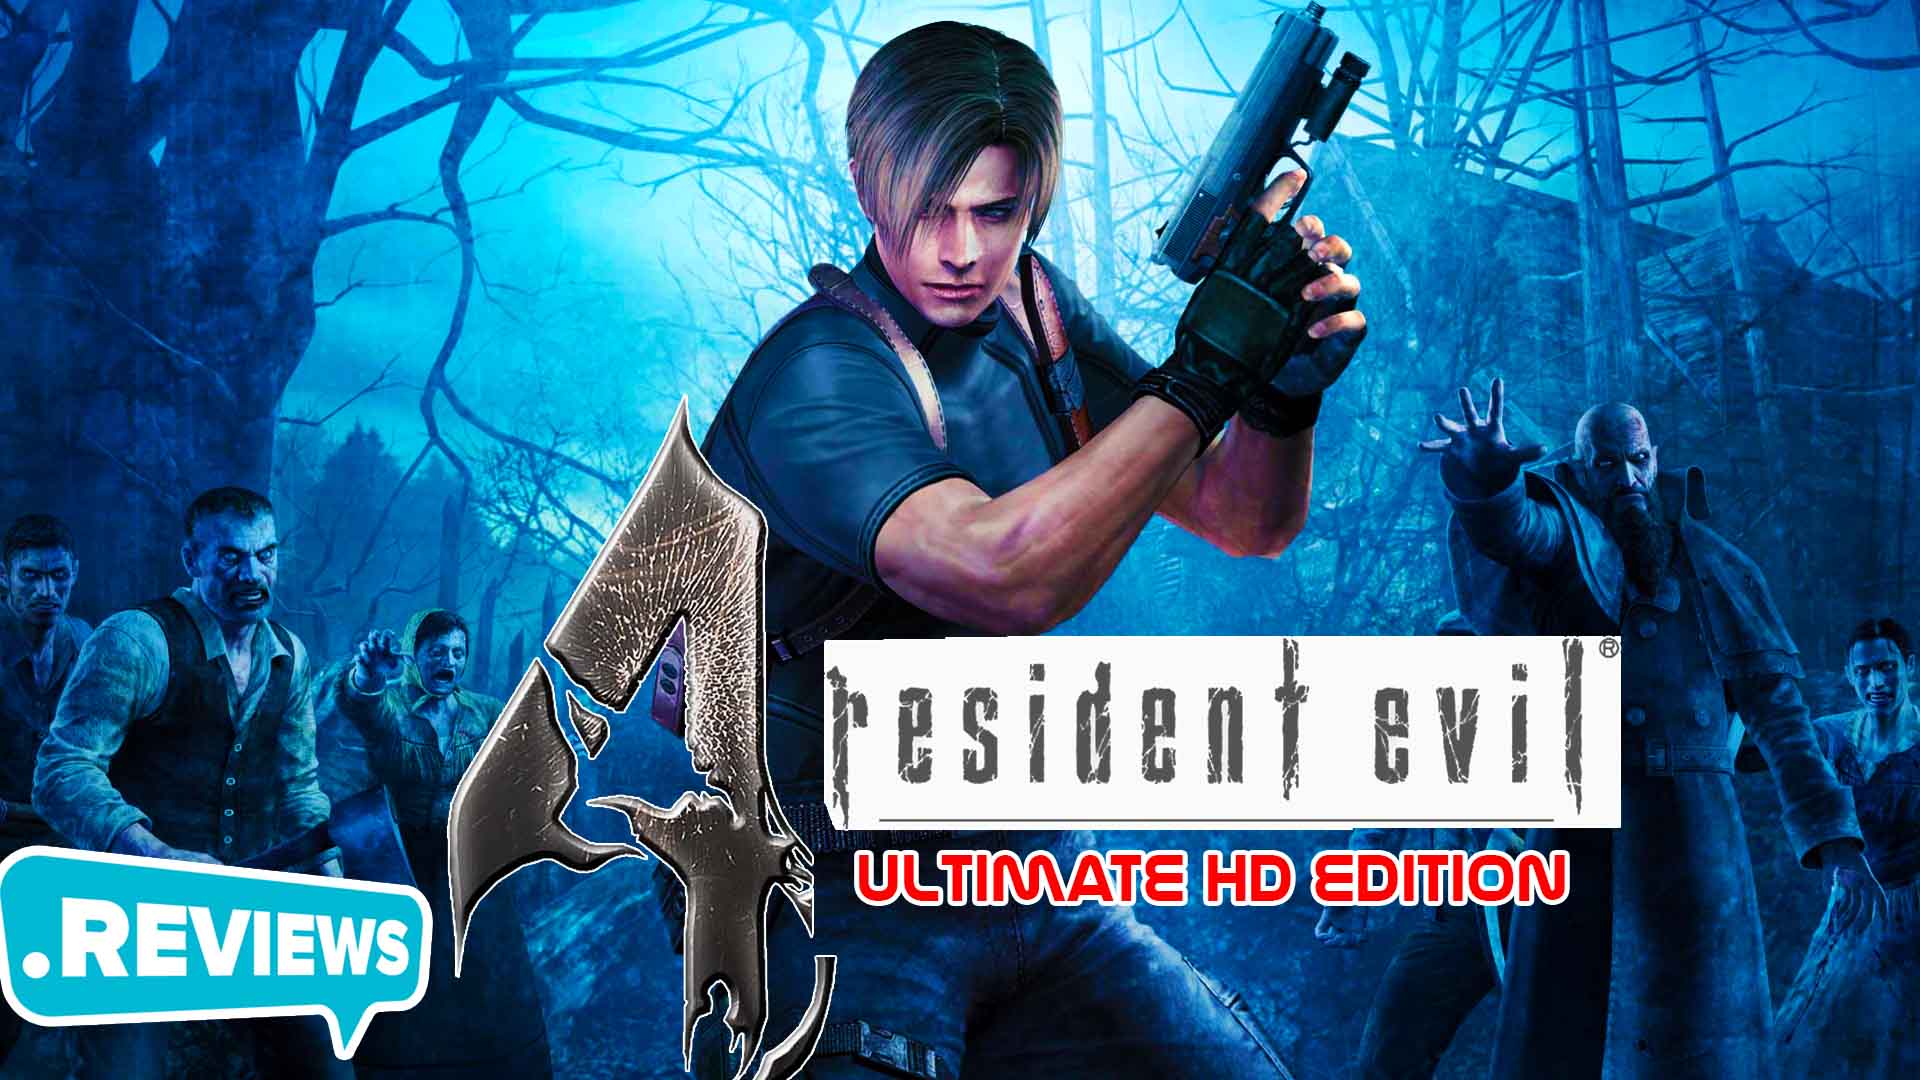 resident evil 4 cheat edition ps2 iso torrent